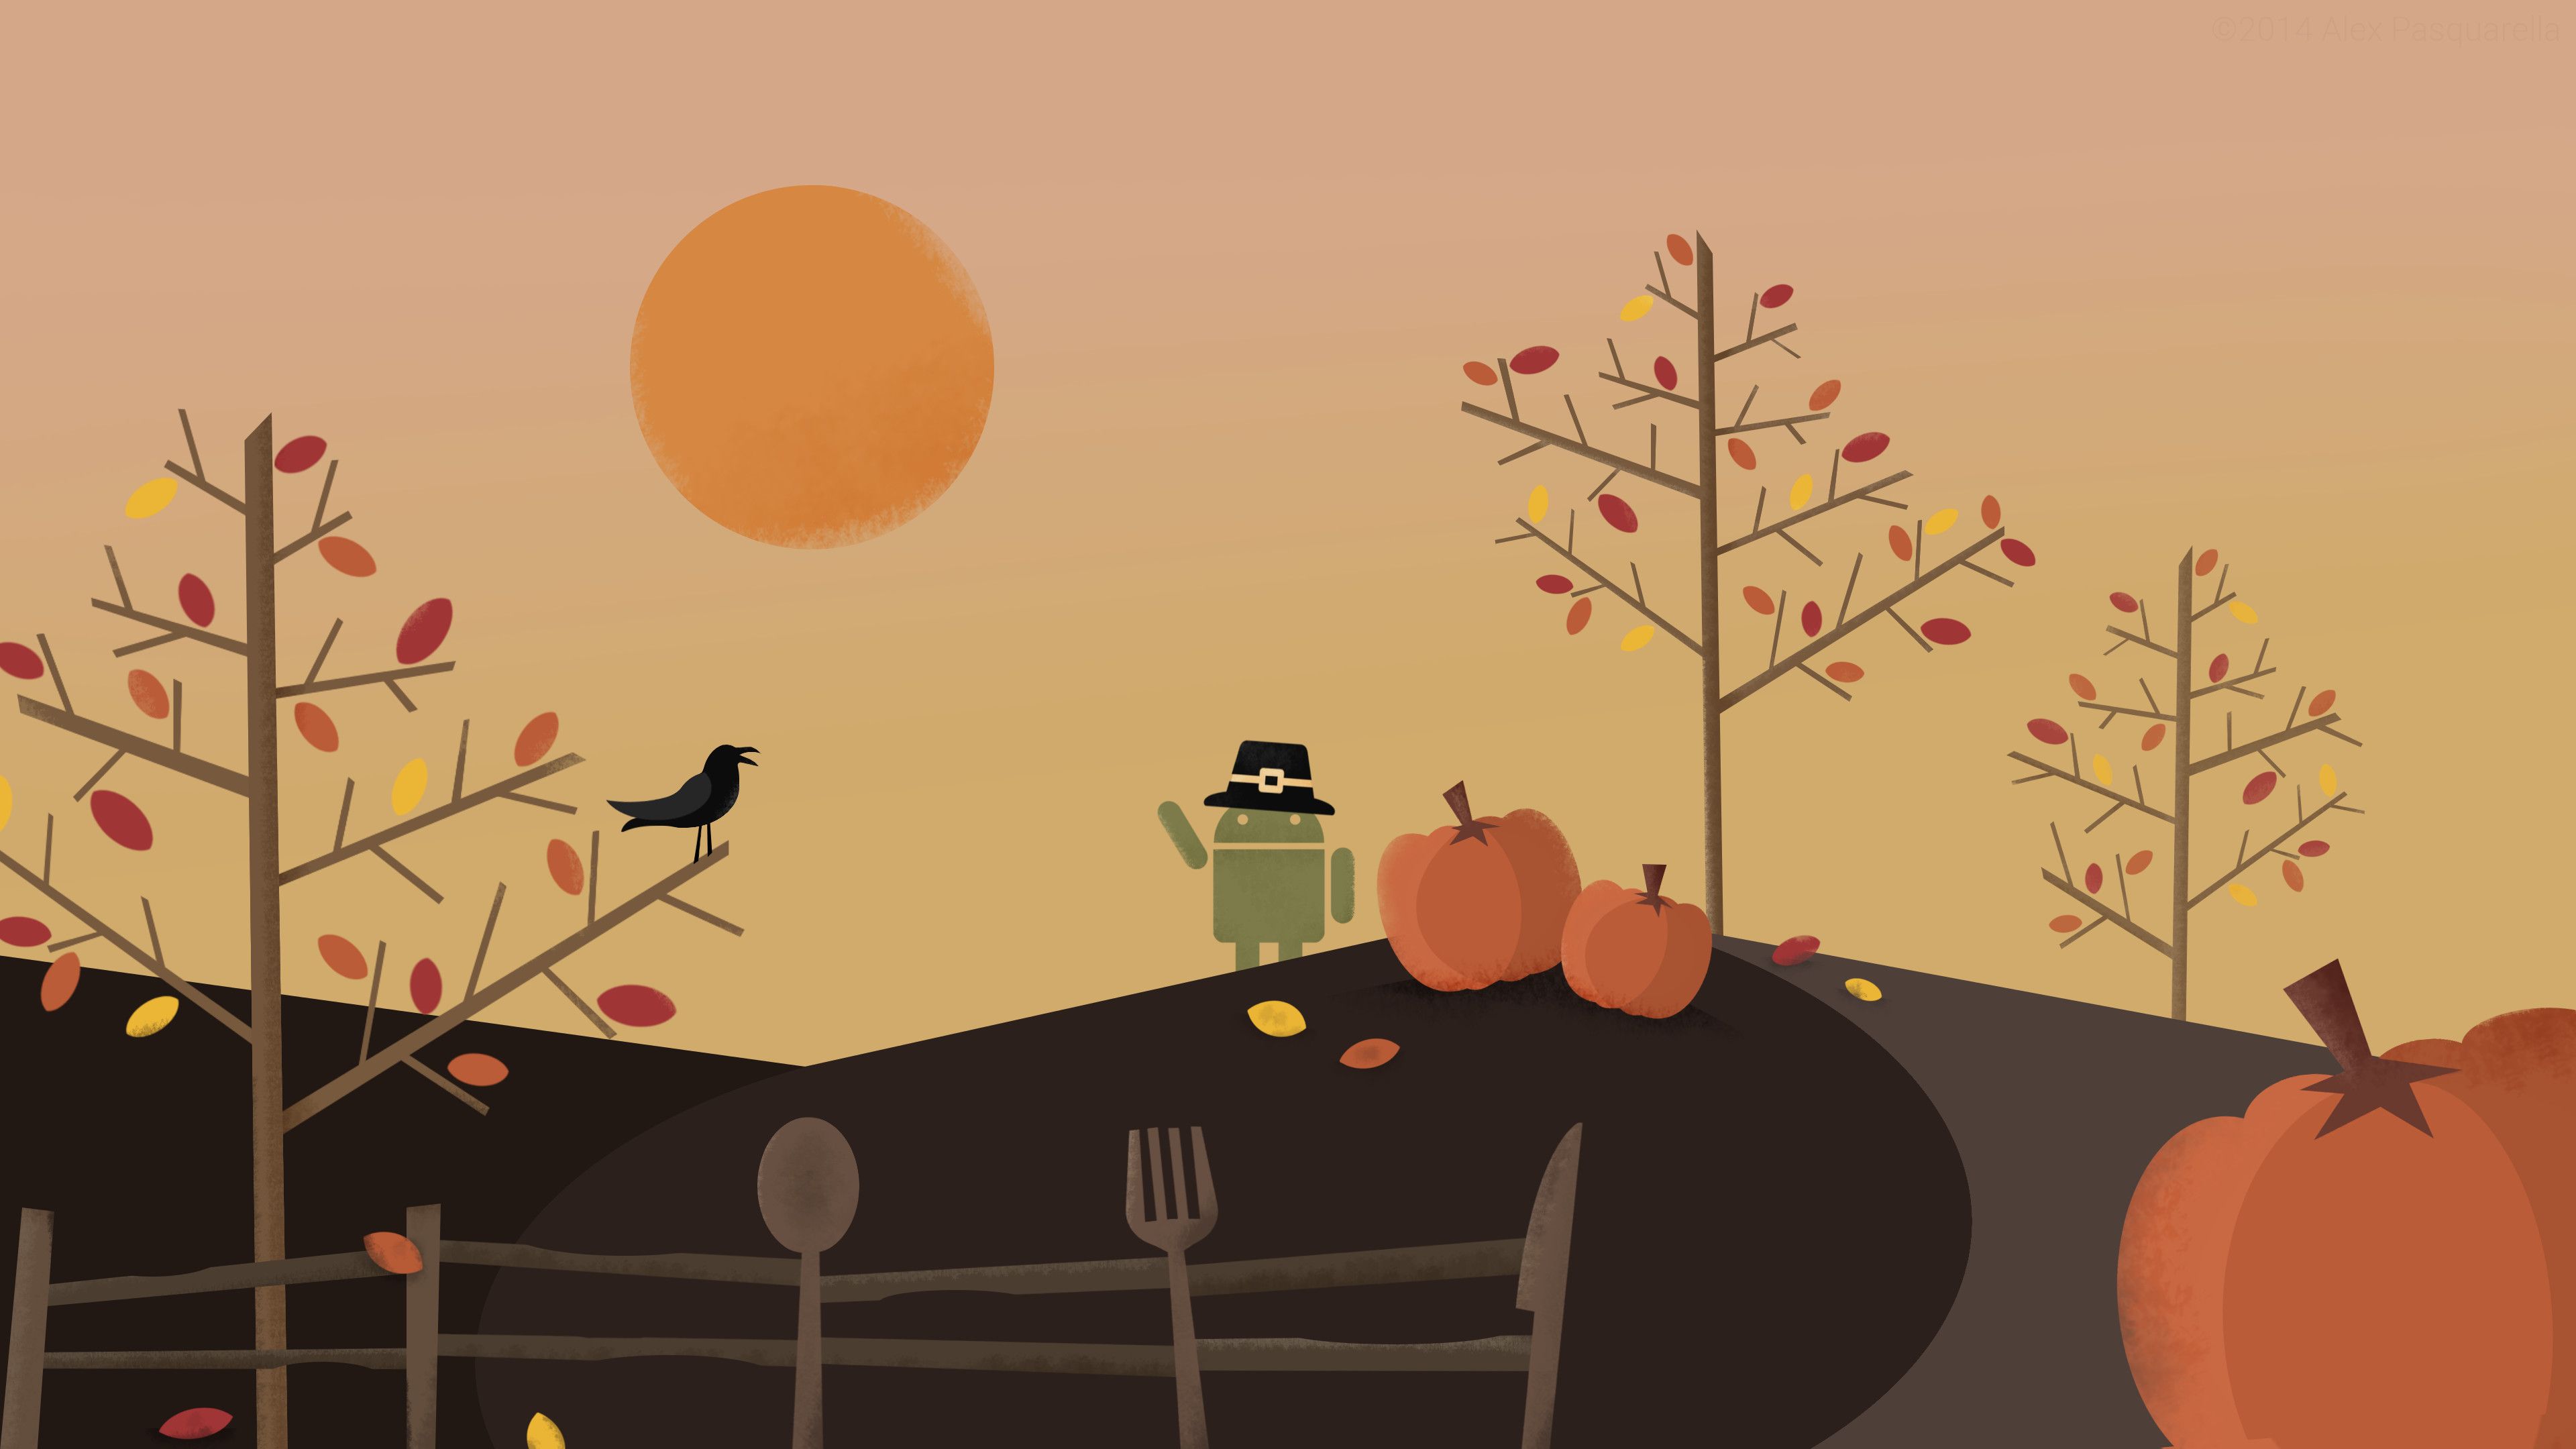 Android with a crow, pumpkin, and fence - Thanksgiving